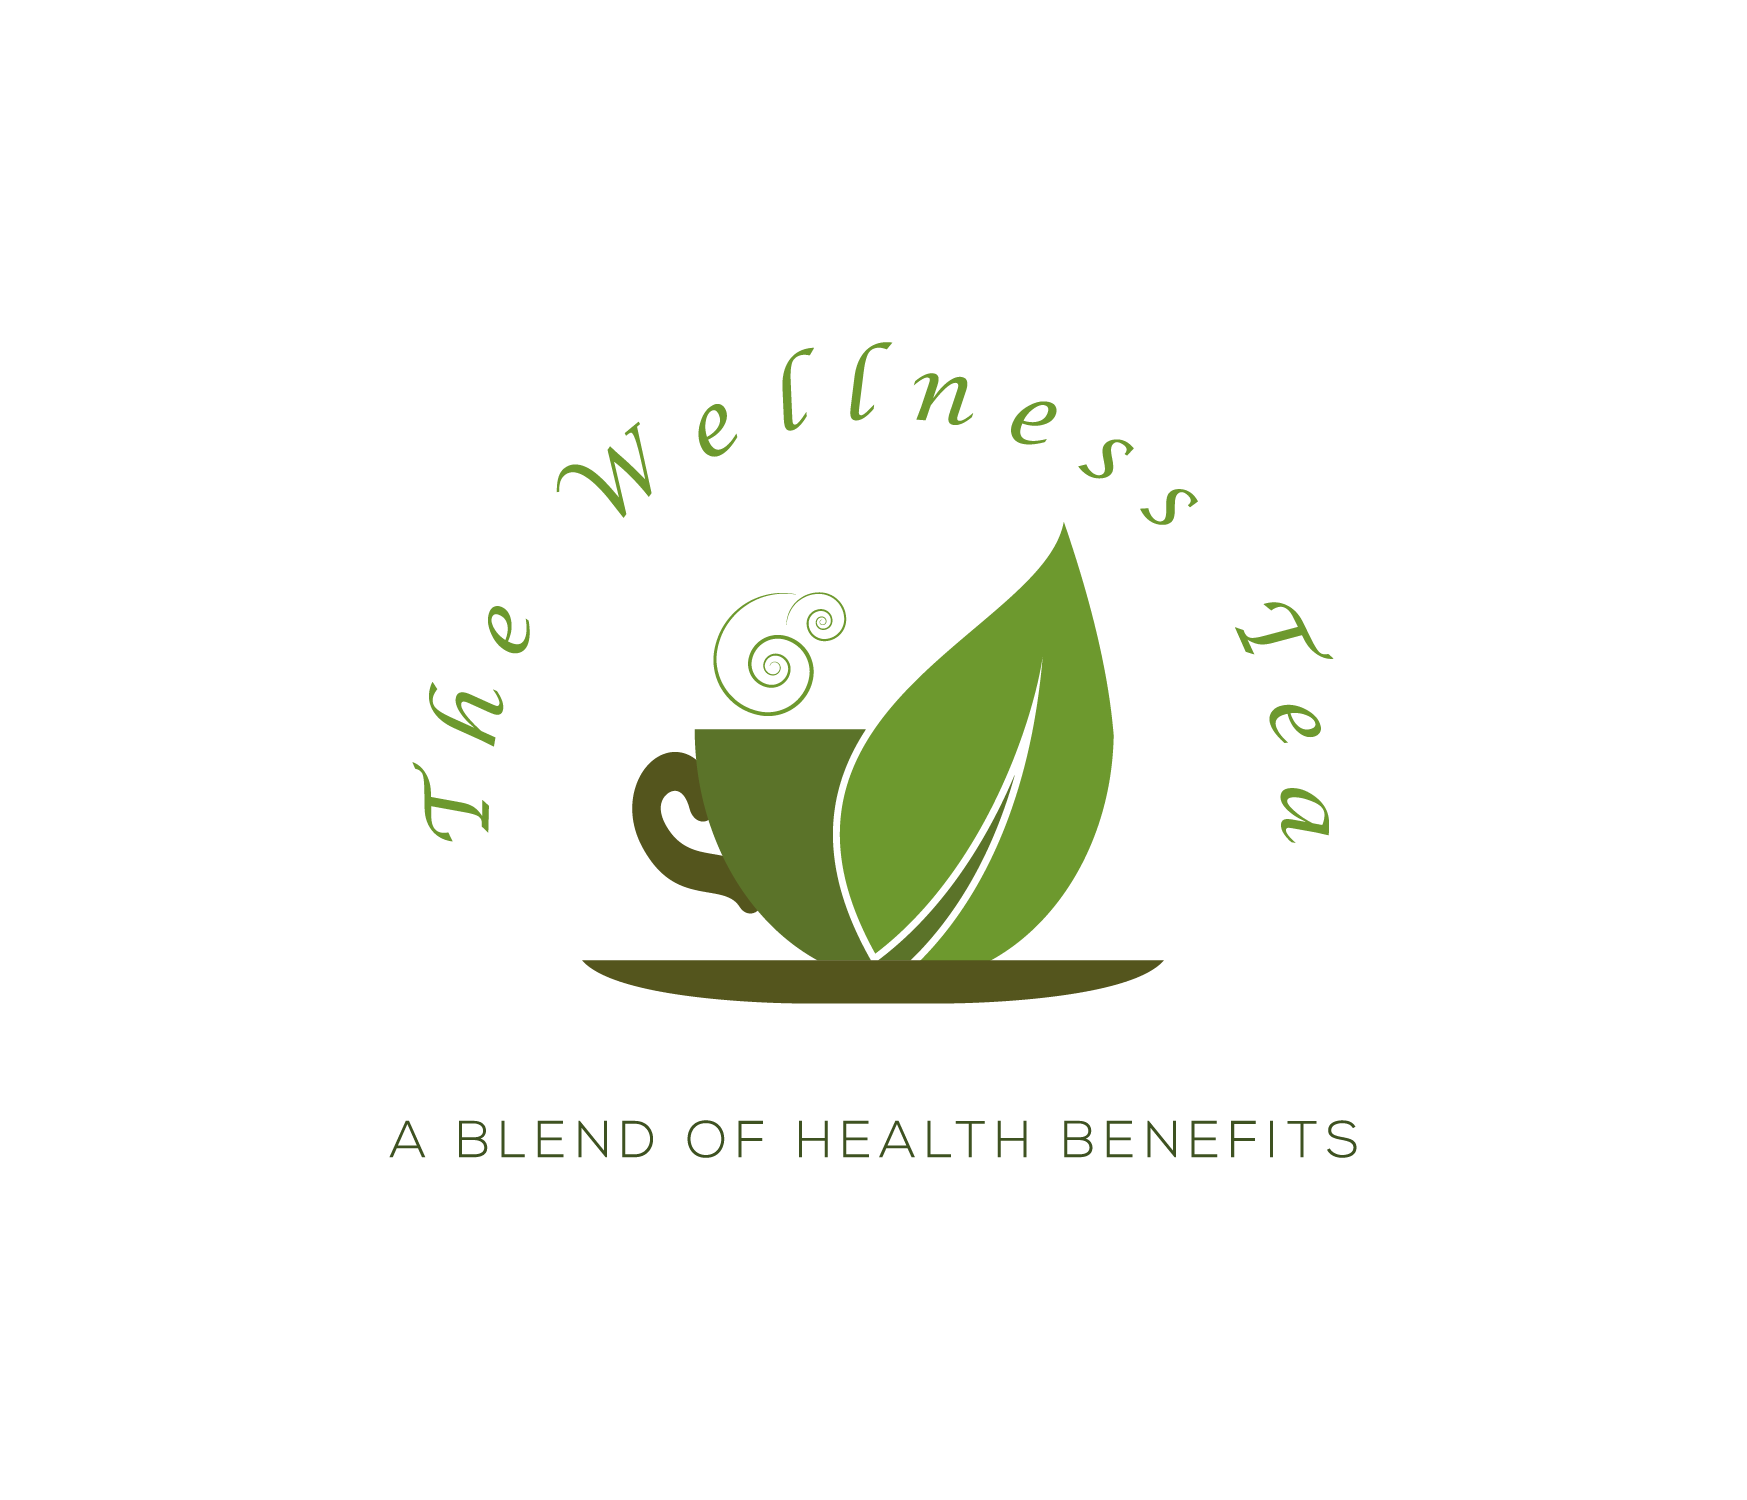 Relax, Rejuvenate, and Recharge - The Wellness Tea